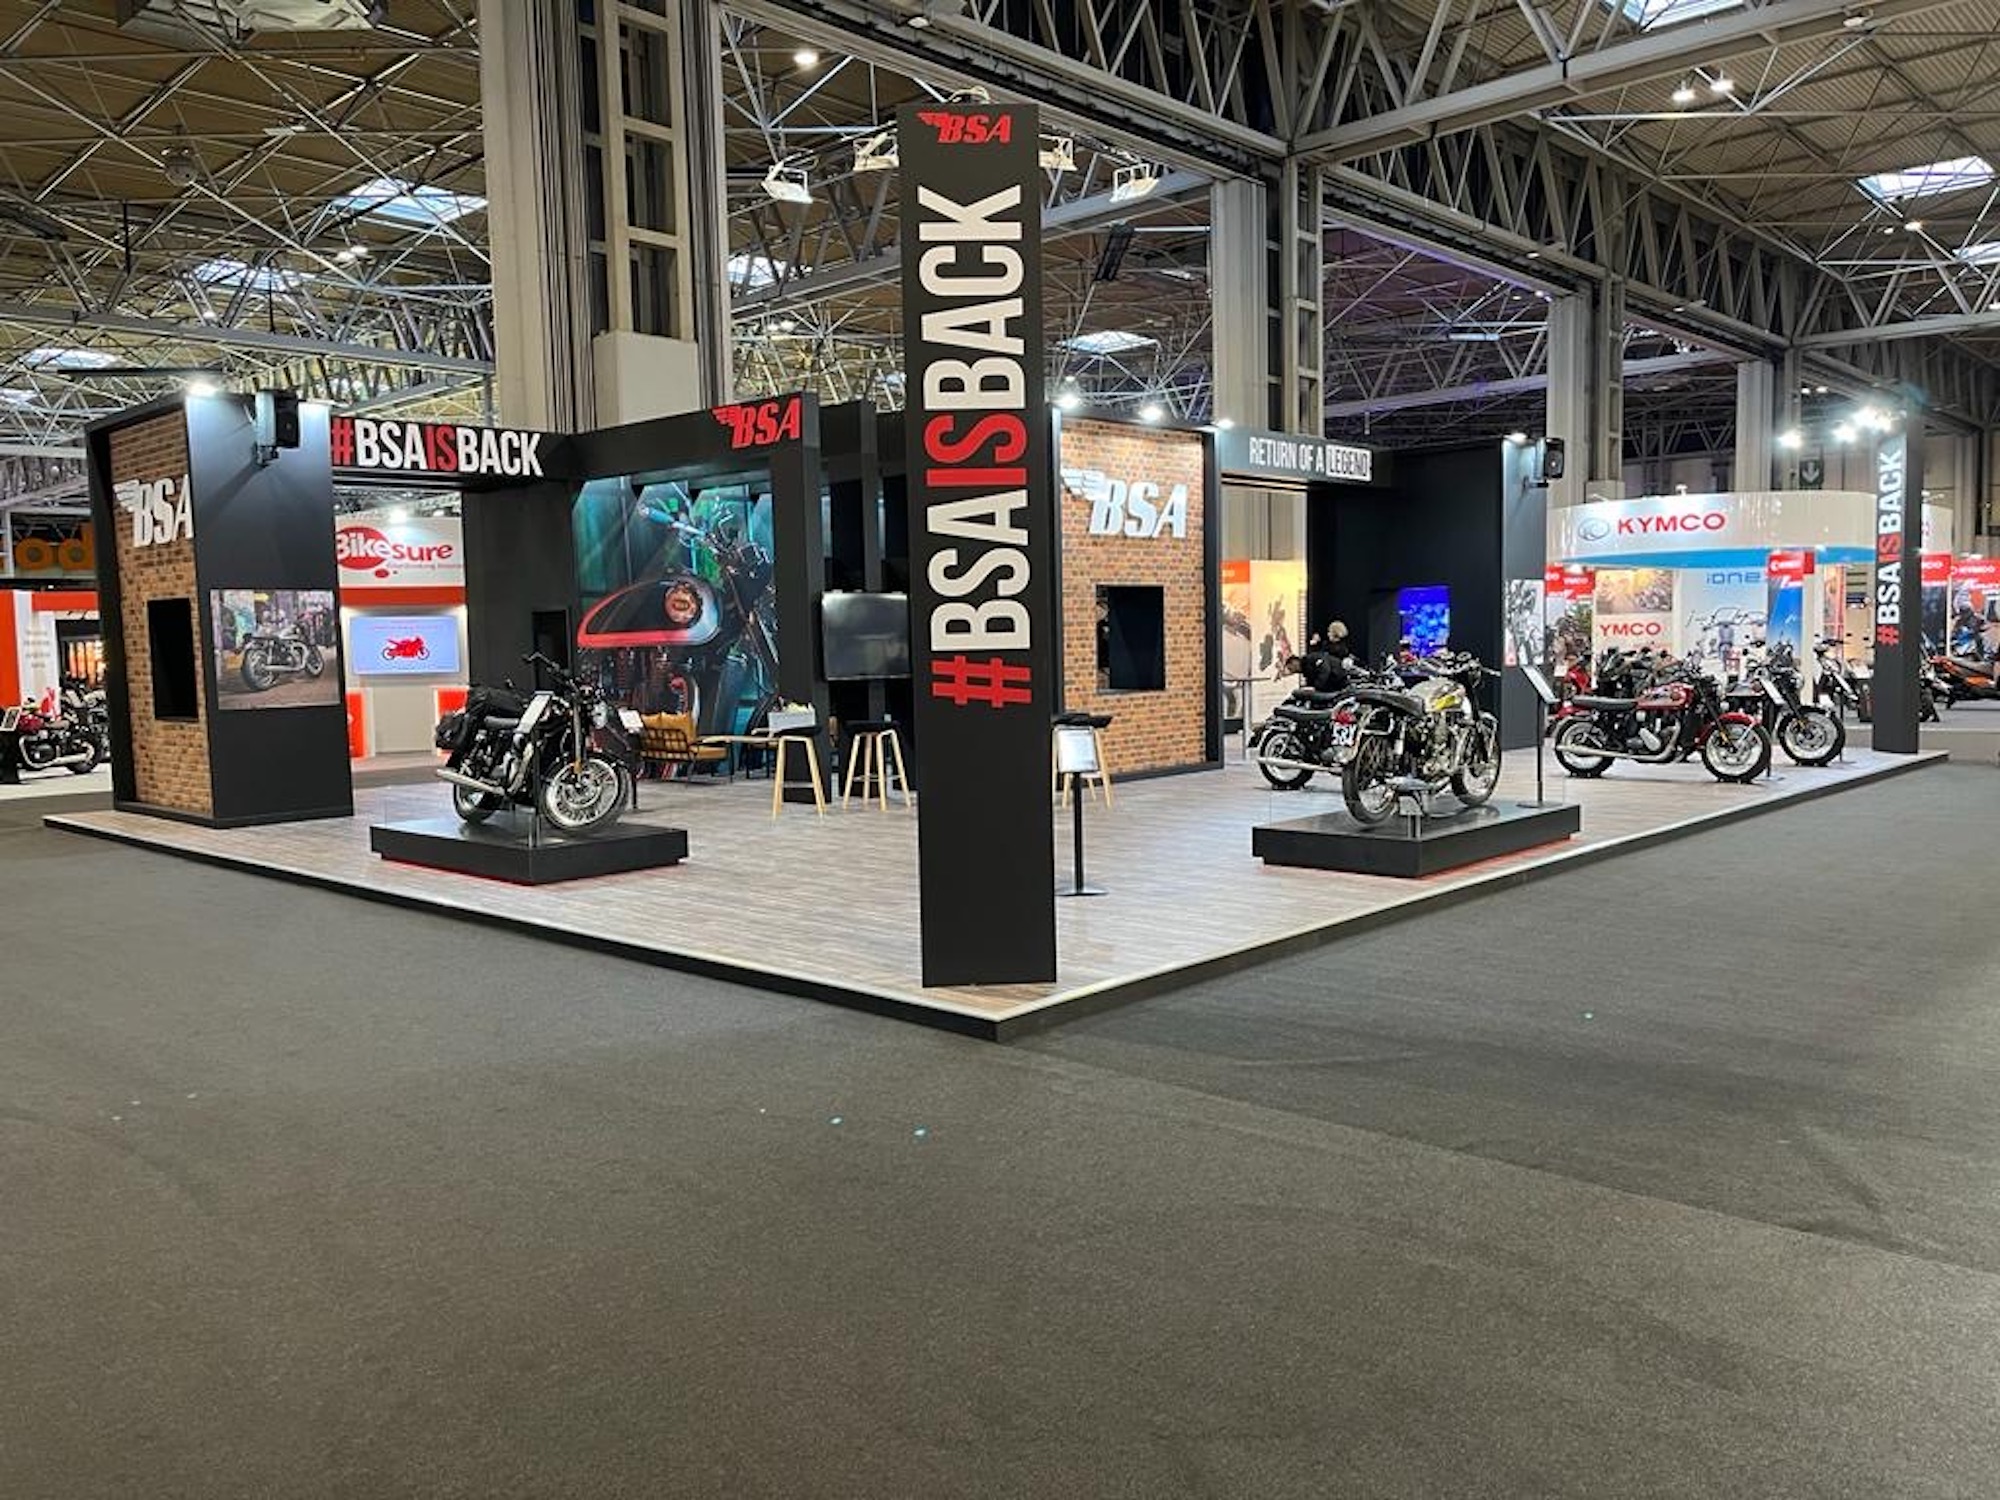 BSA at Motorcycle Live. Media sourced from BSA's Facebook page.